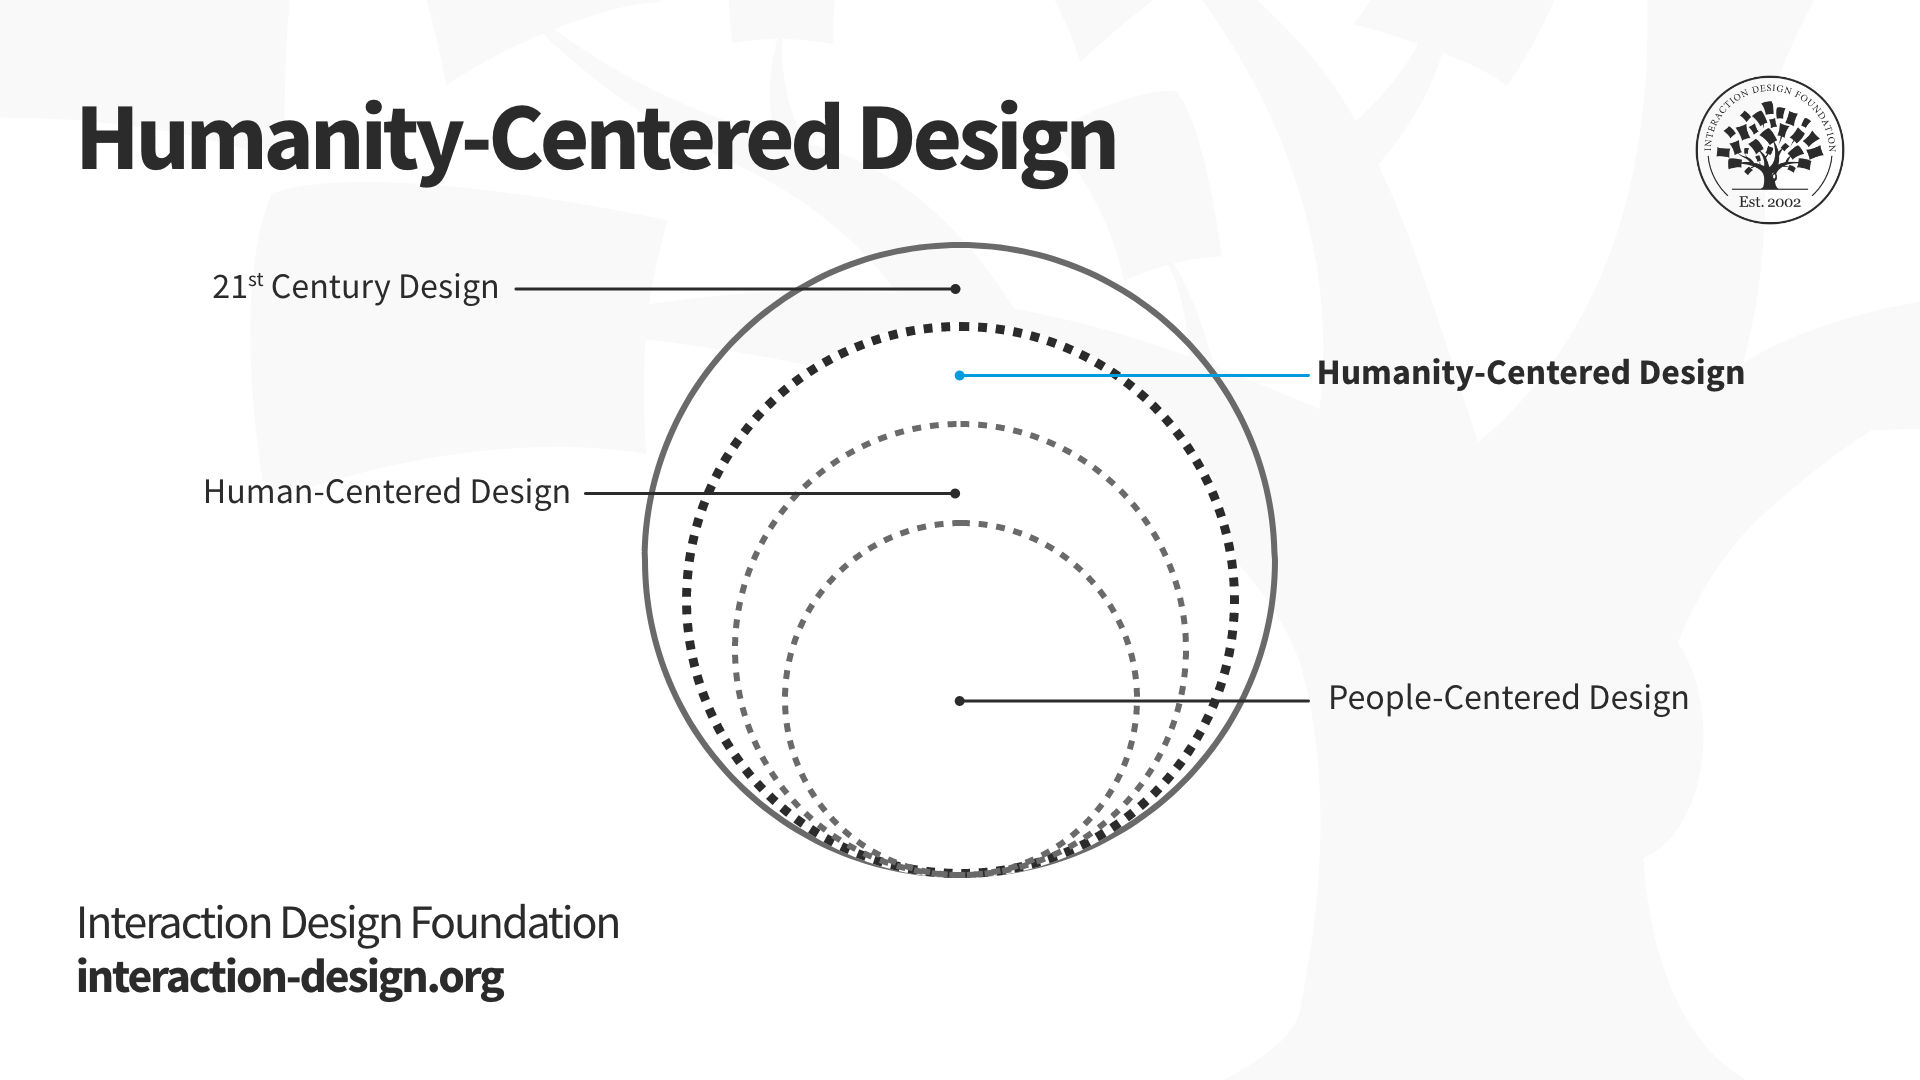 Venn diagram that shows the scope and relationship between the different expressions: At the broadest level is 21st century design. Humanity-centered design is a subset of 21st century design. One level narrower, human-centered design is a subset of humanity-centered design. The smallest scope is that of people-centered design, which is a subset of human-centered design.